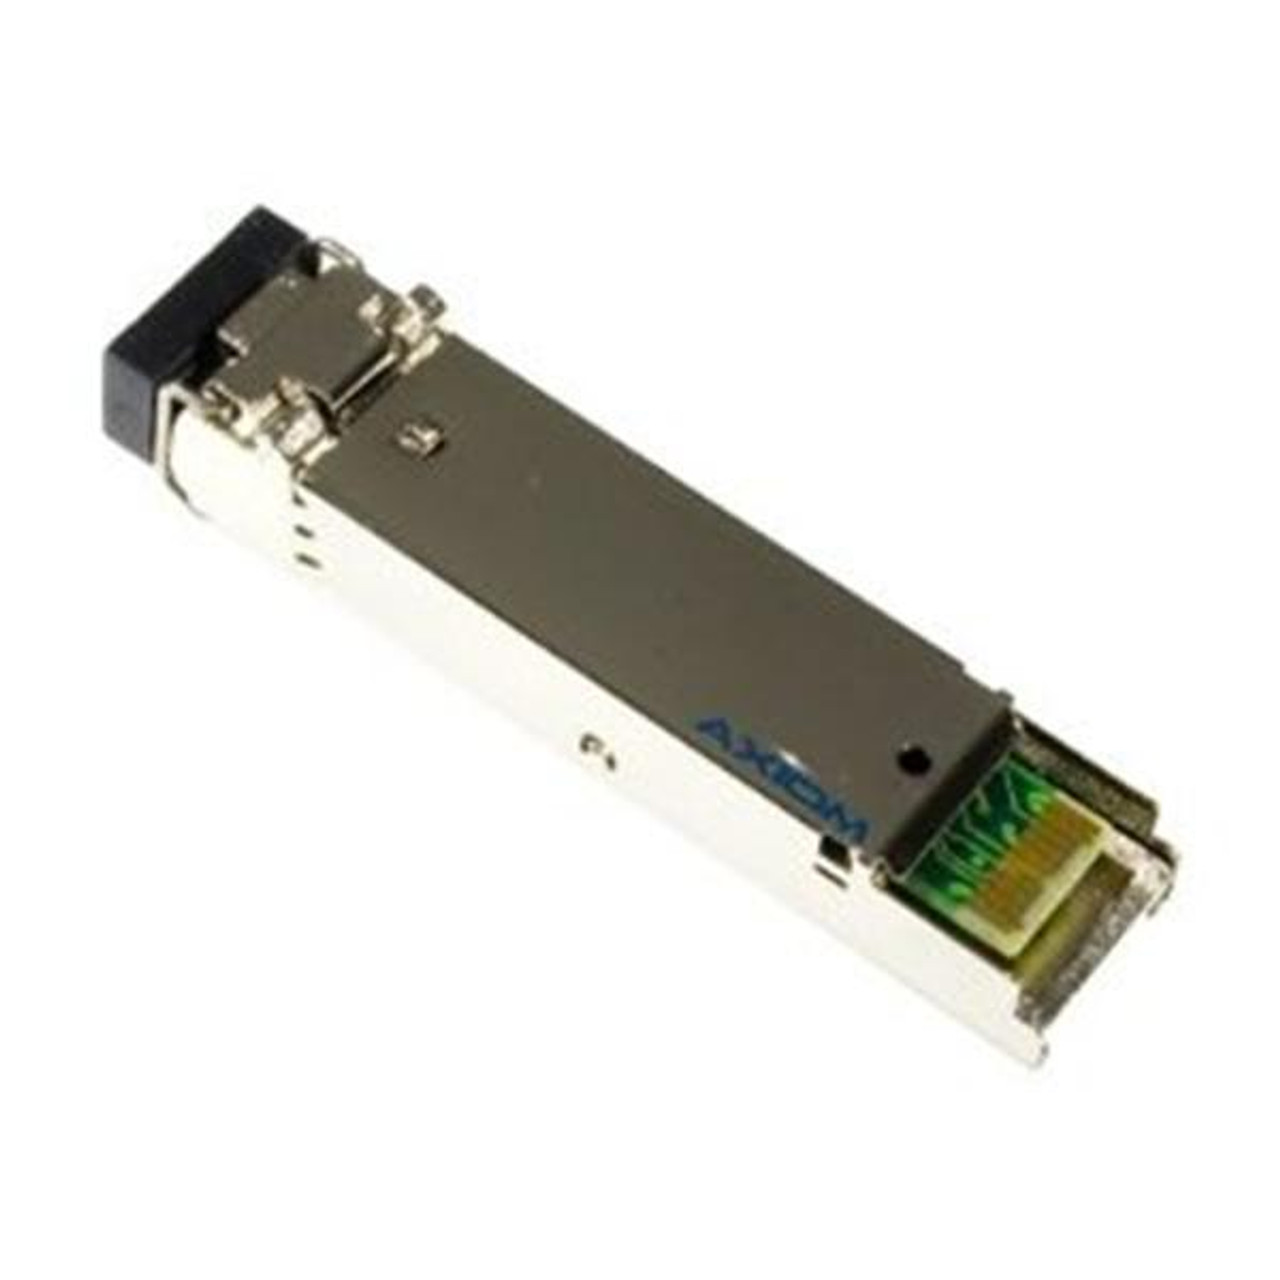 10052 Extreme Networks 1Gbps 1000Base-LX Single-mode Fiber 10km 1310nm Duplex LC Connector SFP Transceiver Module (Refurbished)